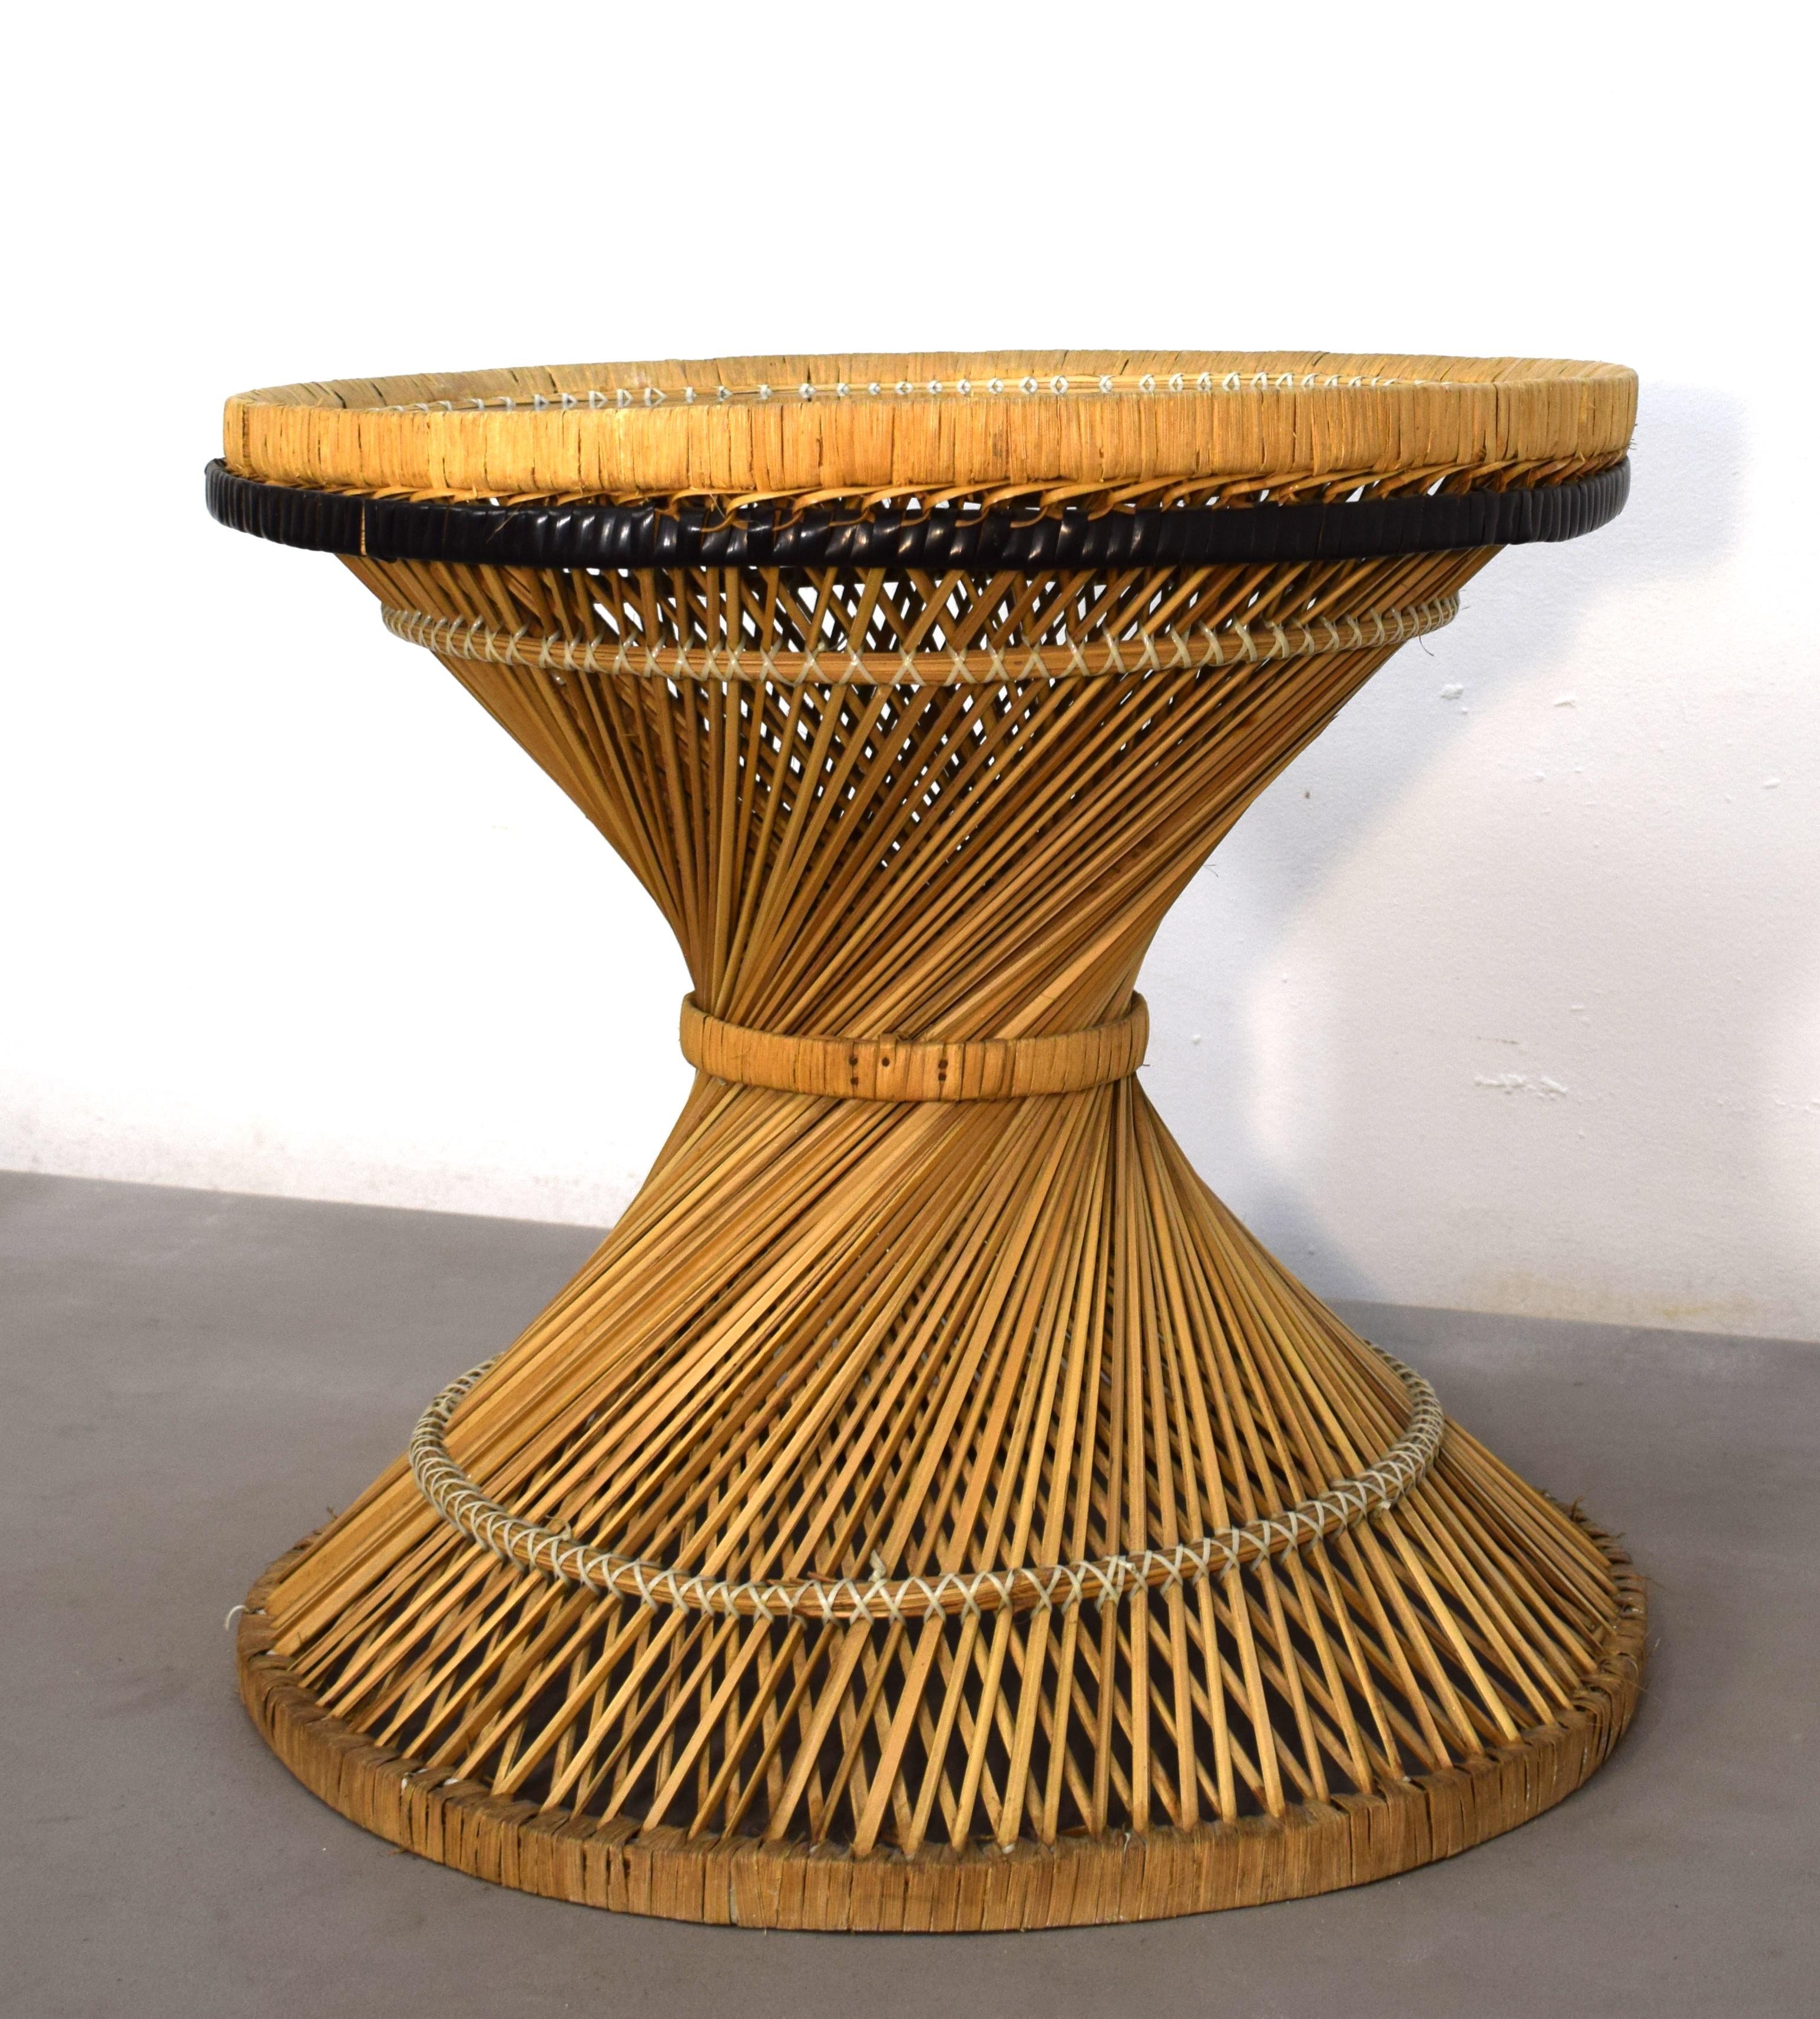 Italian coffee table, straw and smoked glass, 1970s
Dimensions: H= 52 cm; D= 58 cm.